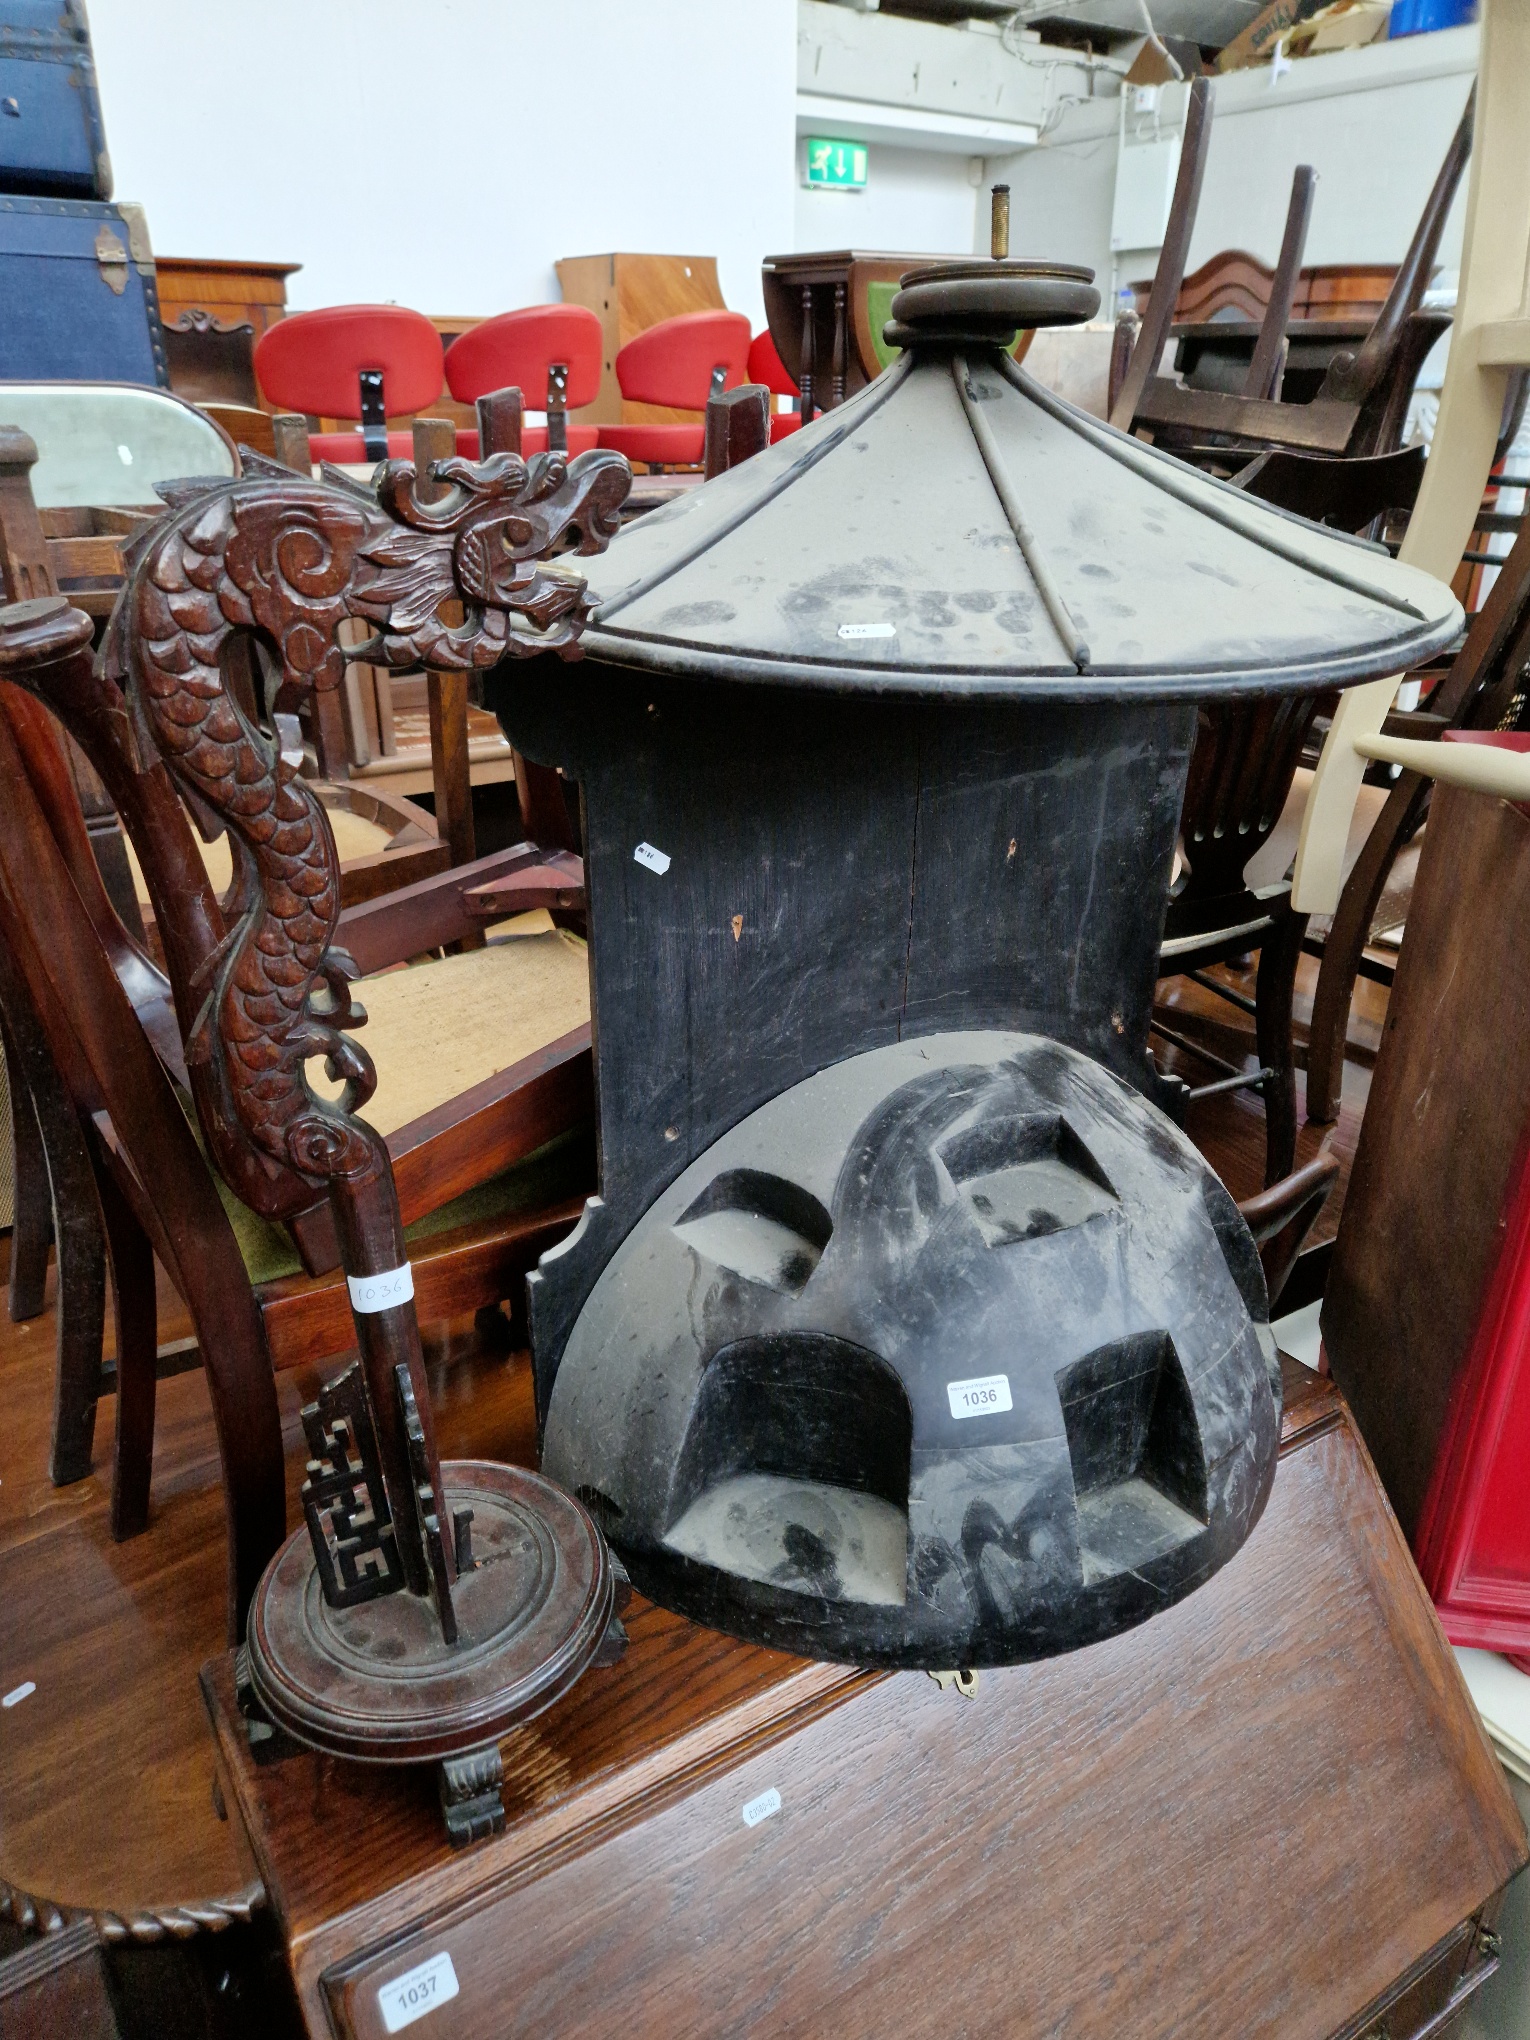 An Eastern display stand modelled as a pagoda and a carved wood lamp base modelled as a dragon.